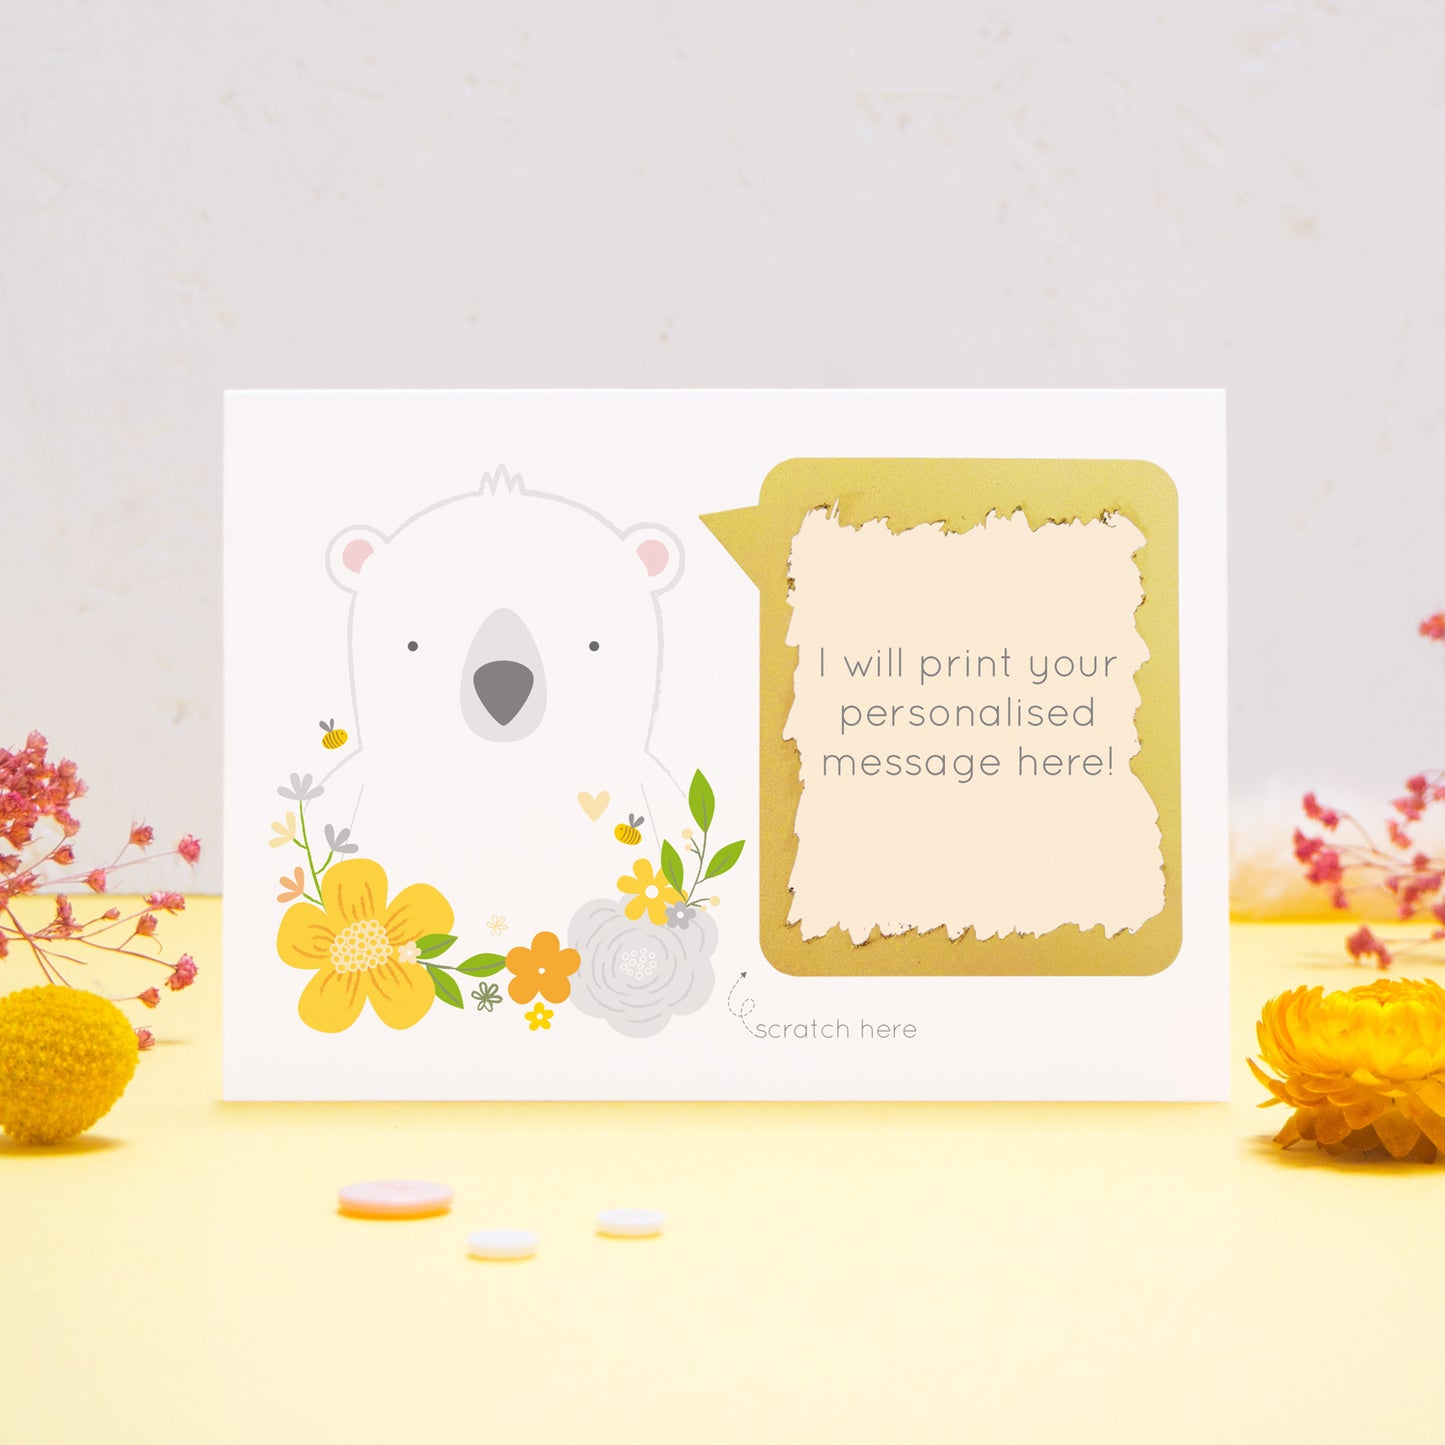 A personalised scratch card showing where your message will be printed featuring a white bear, yellow flowers and a peach text box. This has been shot on a yellow and grey background with flowers. The gold panel has been scratched away to reveal the message.